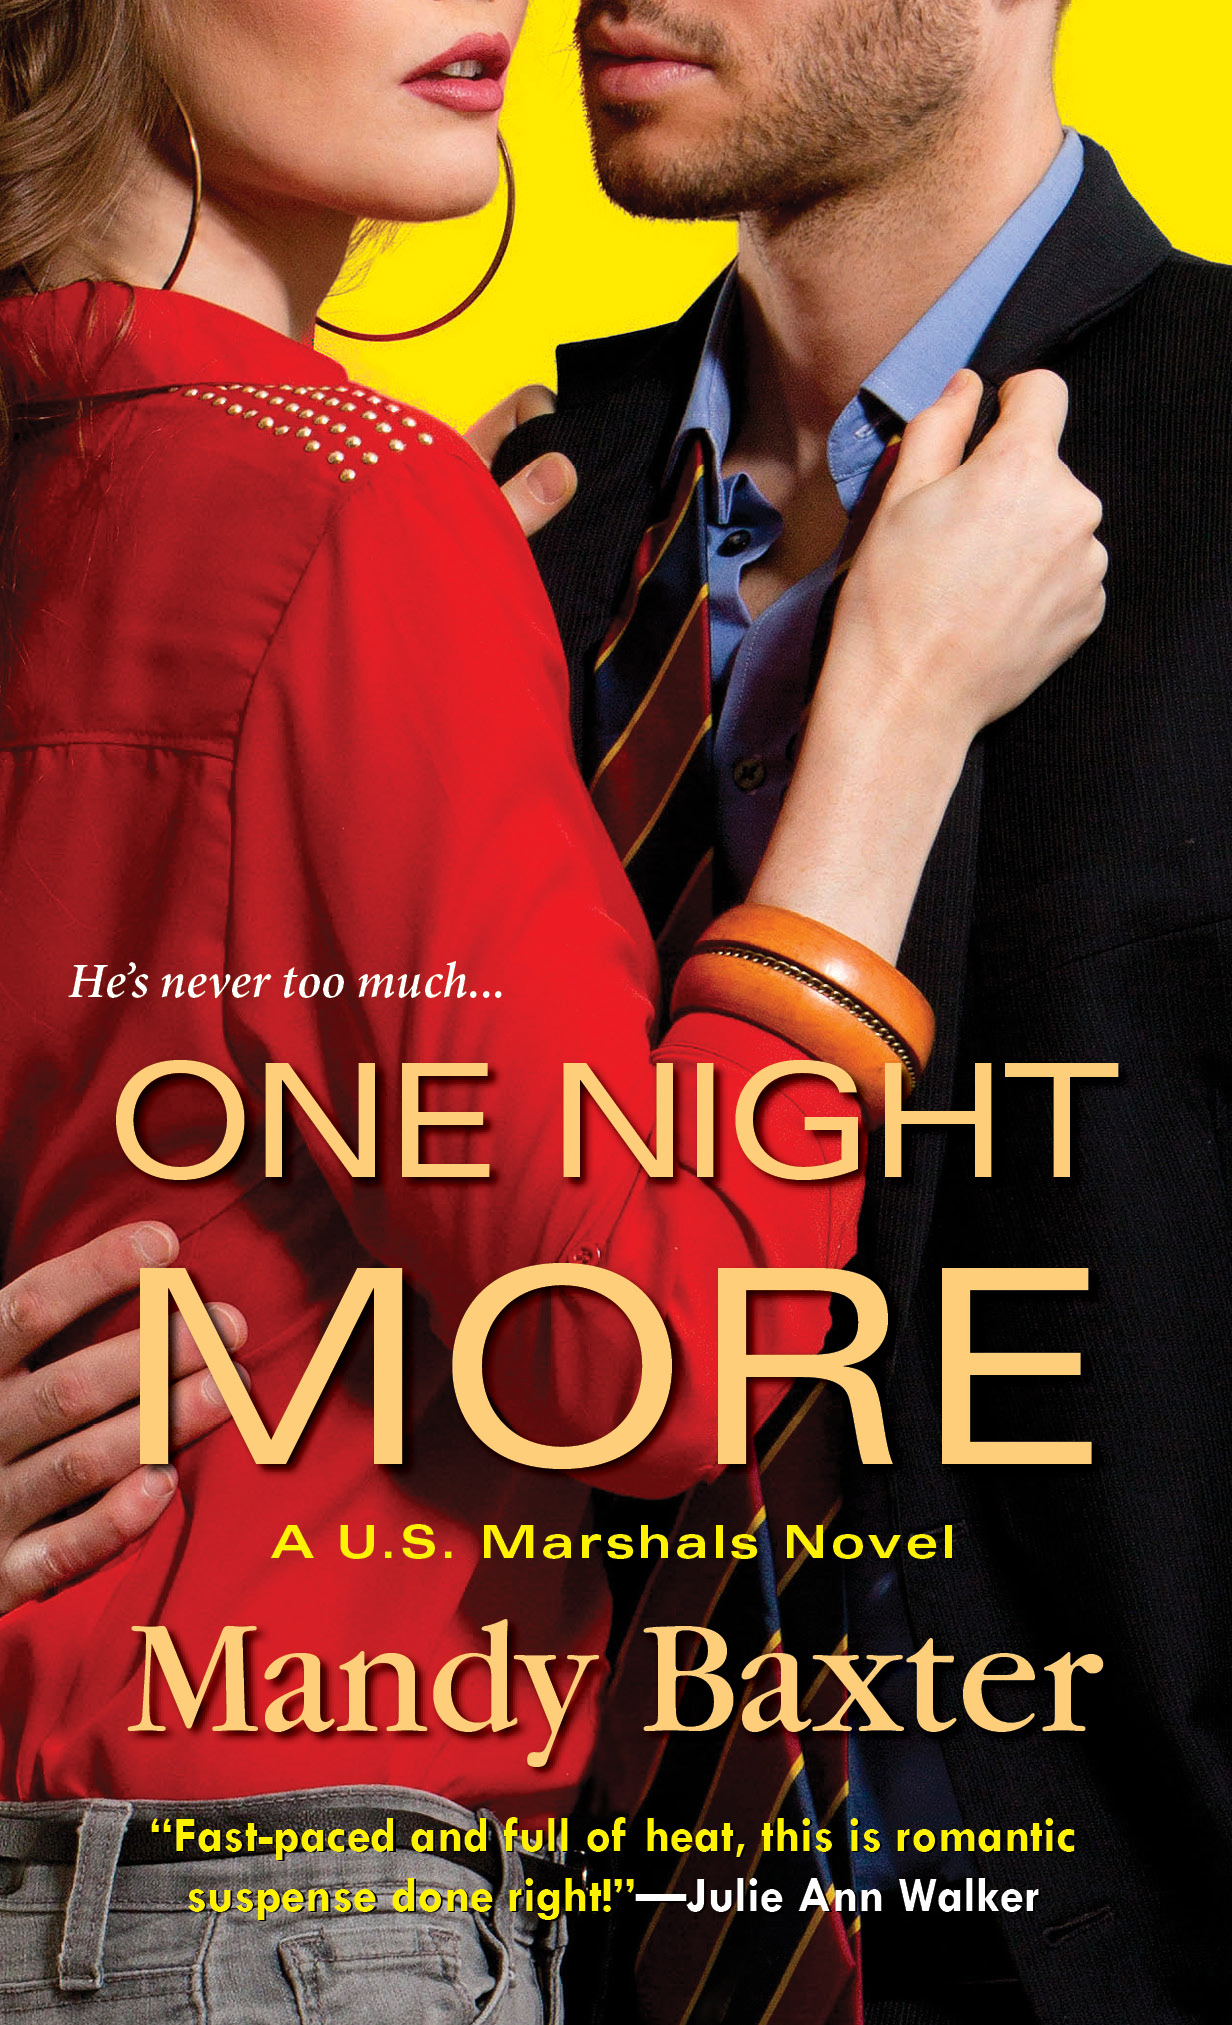 One Night More by Mandy Baxter